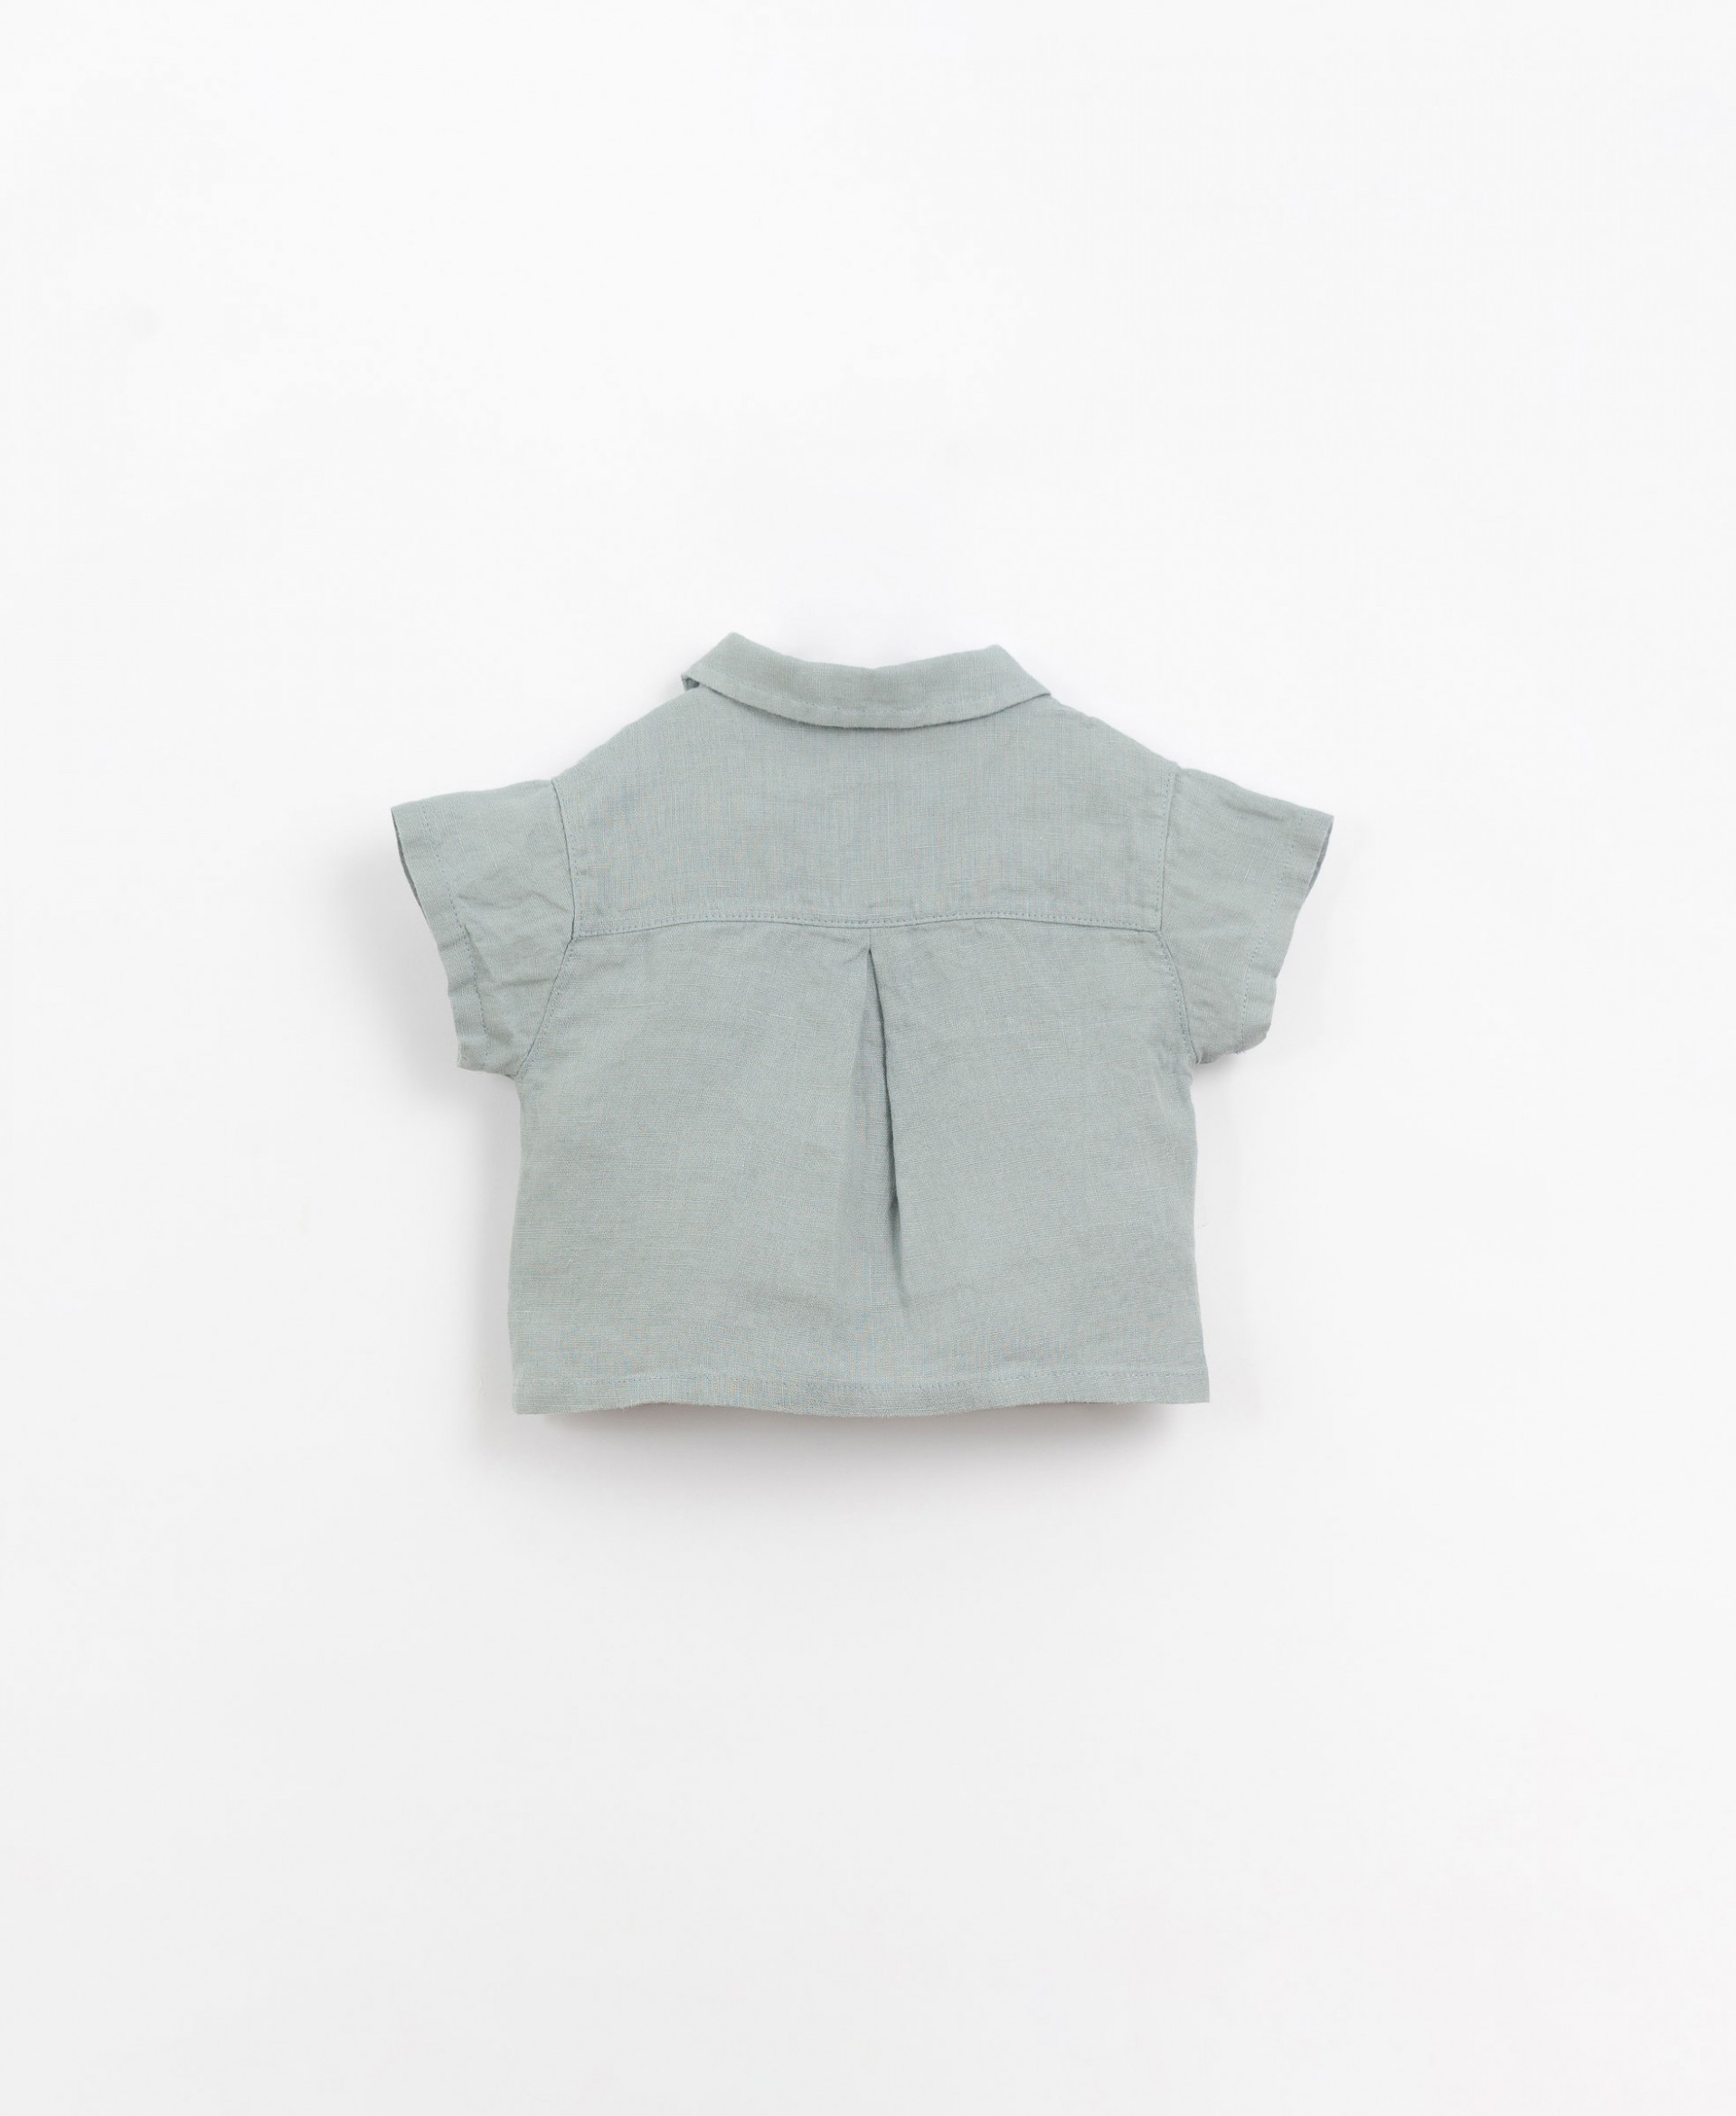 Linen shirt with pockets | Organic Care